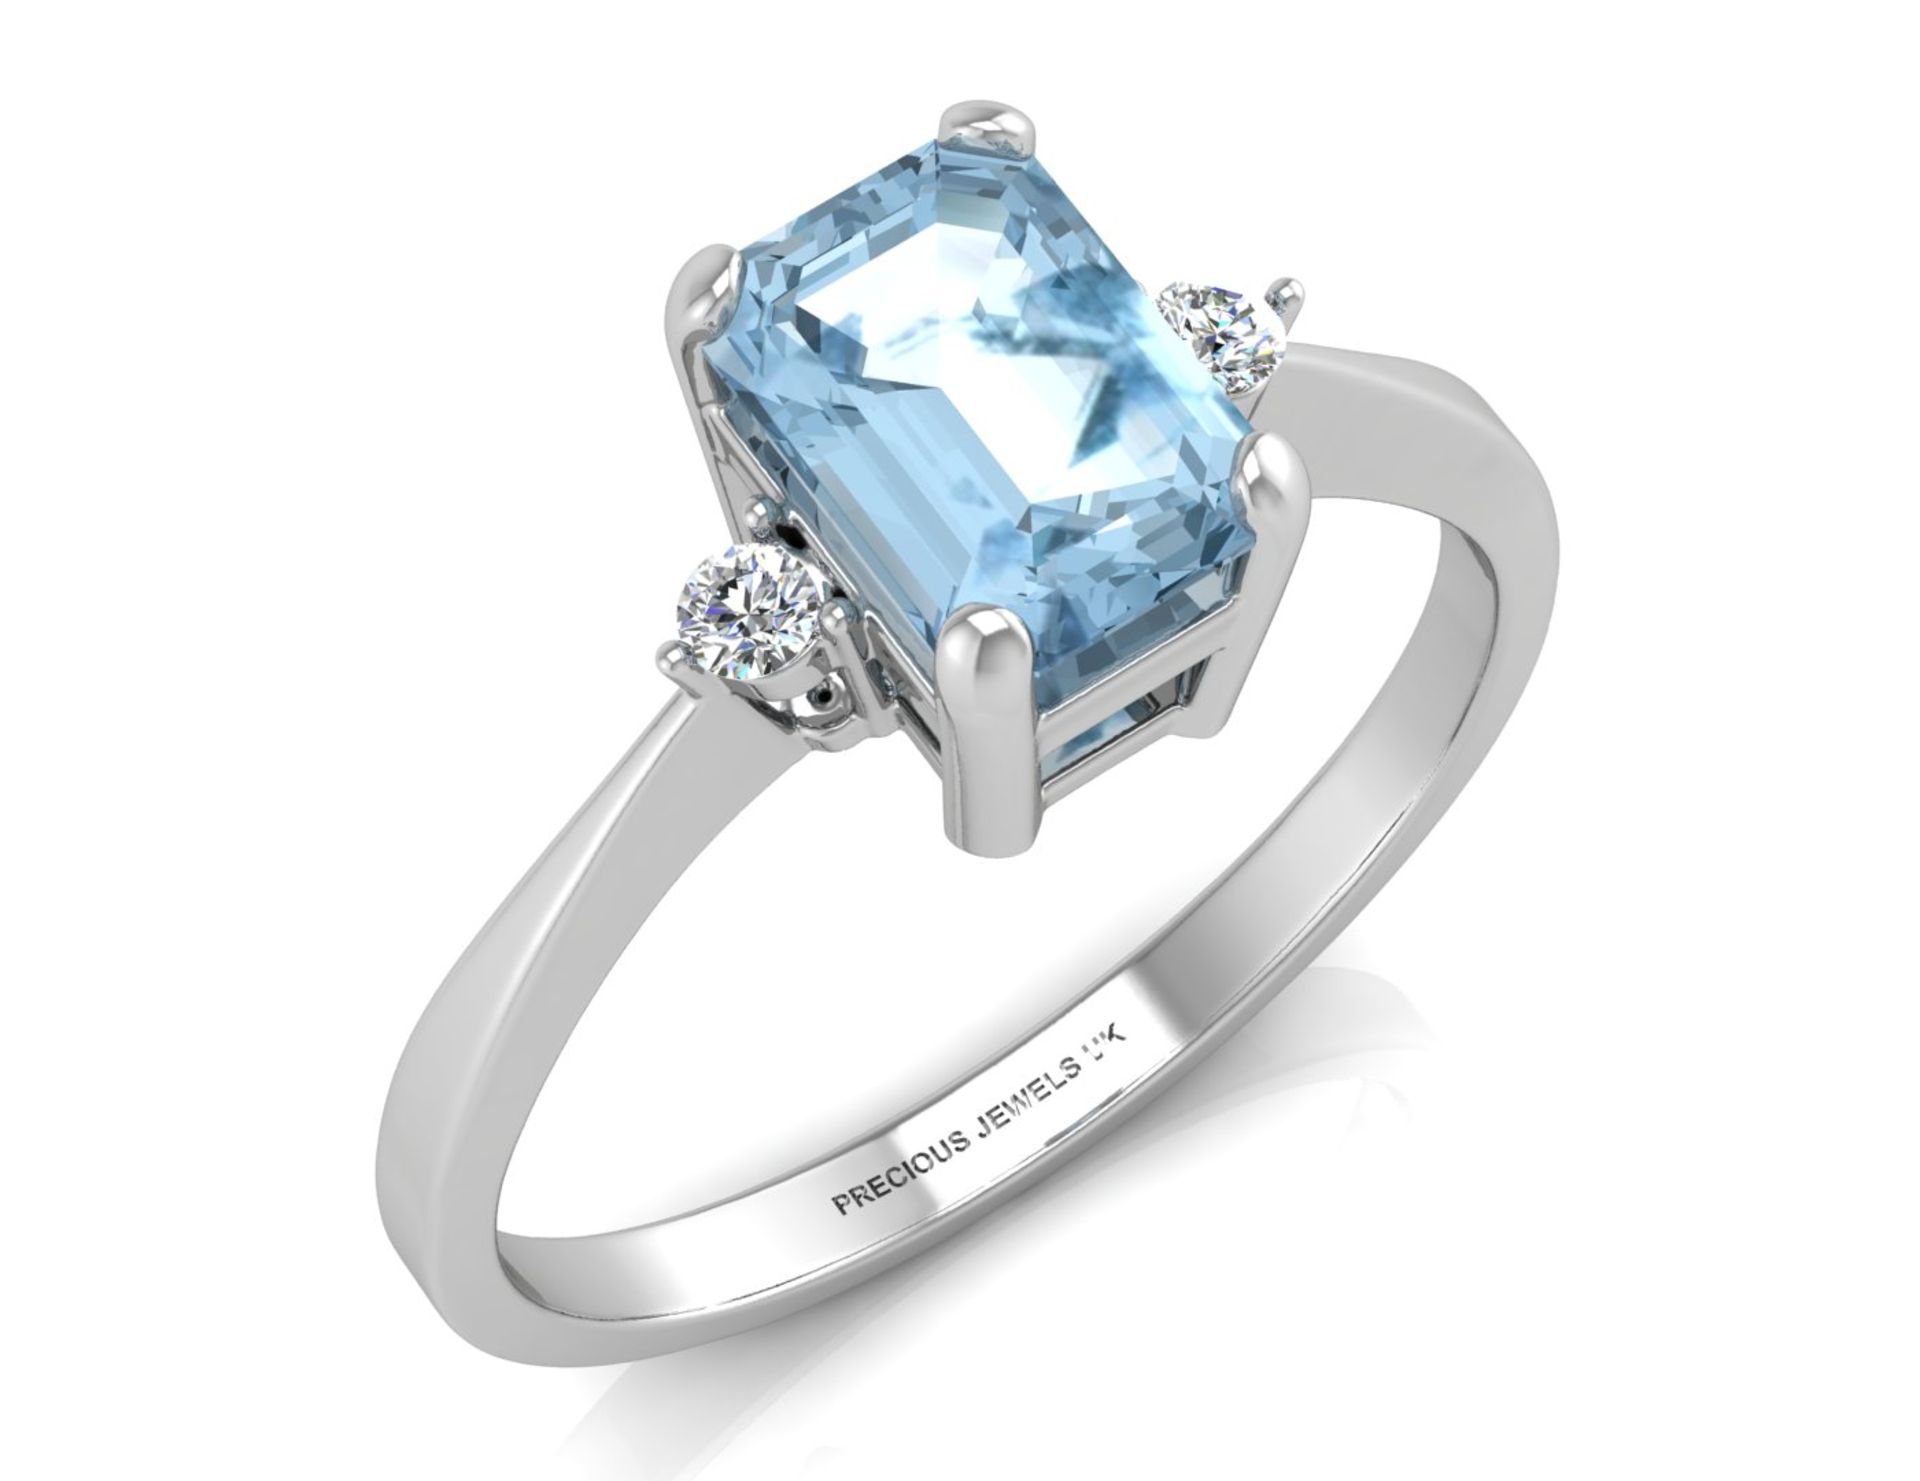 9ct White Gold Diamond And Emerald Cut Blue Topaz Ring 0.04 Carats - Valued by GIE £1,245.00 - An